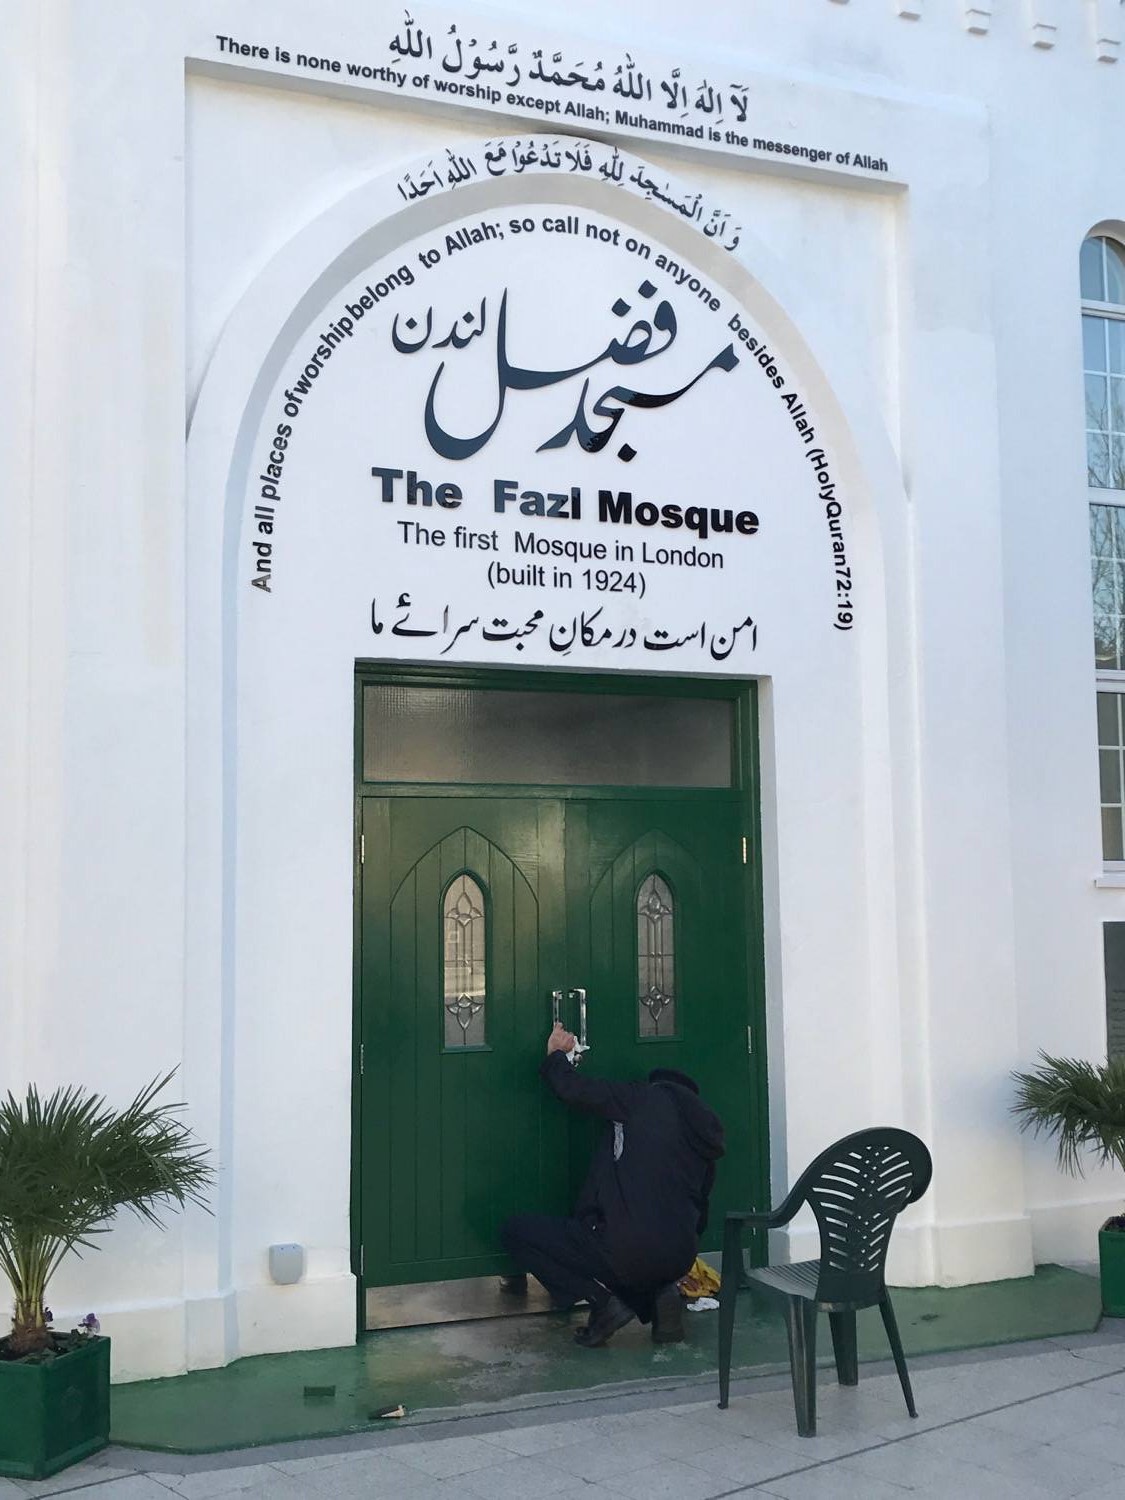 Fazl Mosque - View of the main entrance with inscriptions in Arabic and English